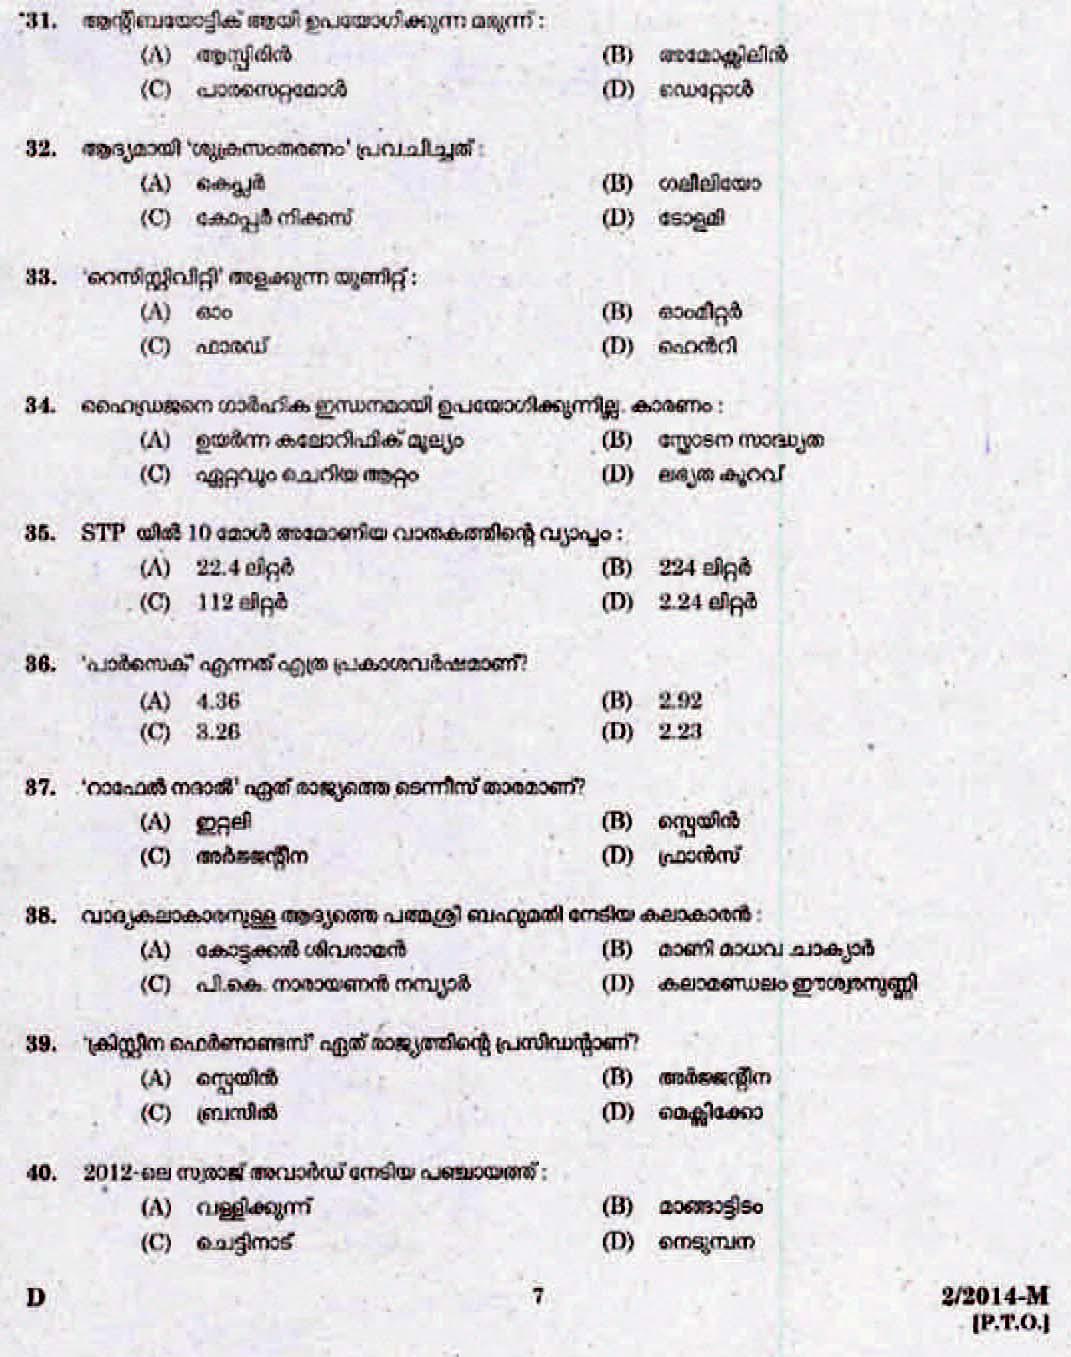 LD Clerk Question Paper Malayalam 2014 Paper Code 022014 M 4